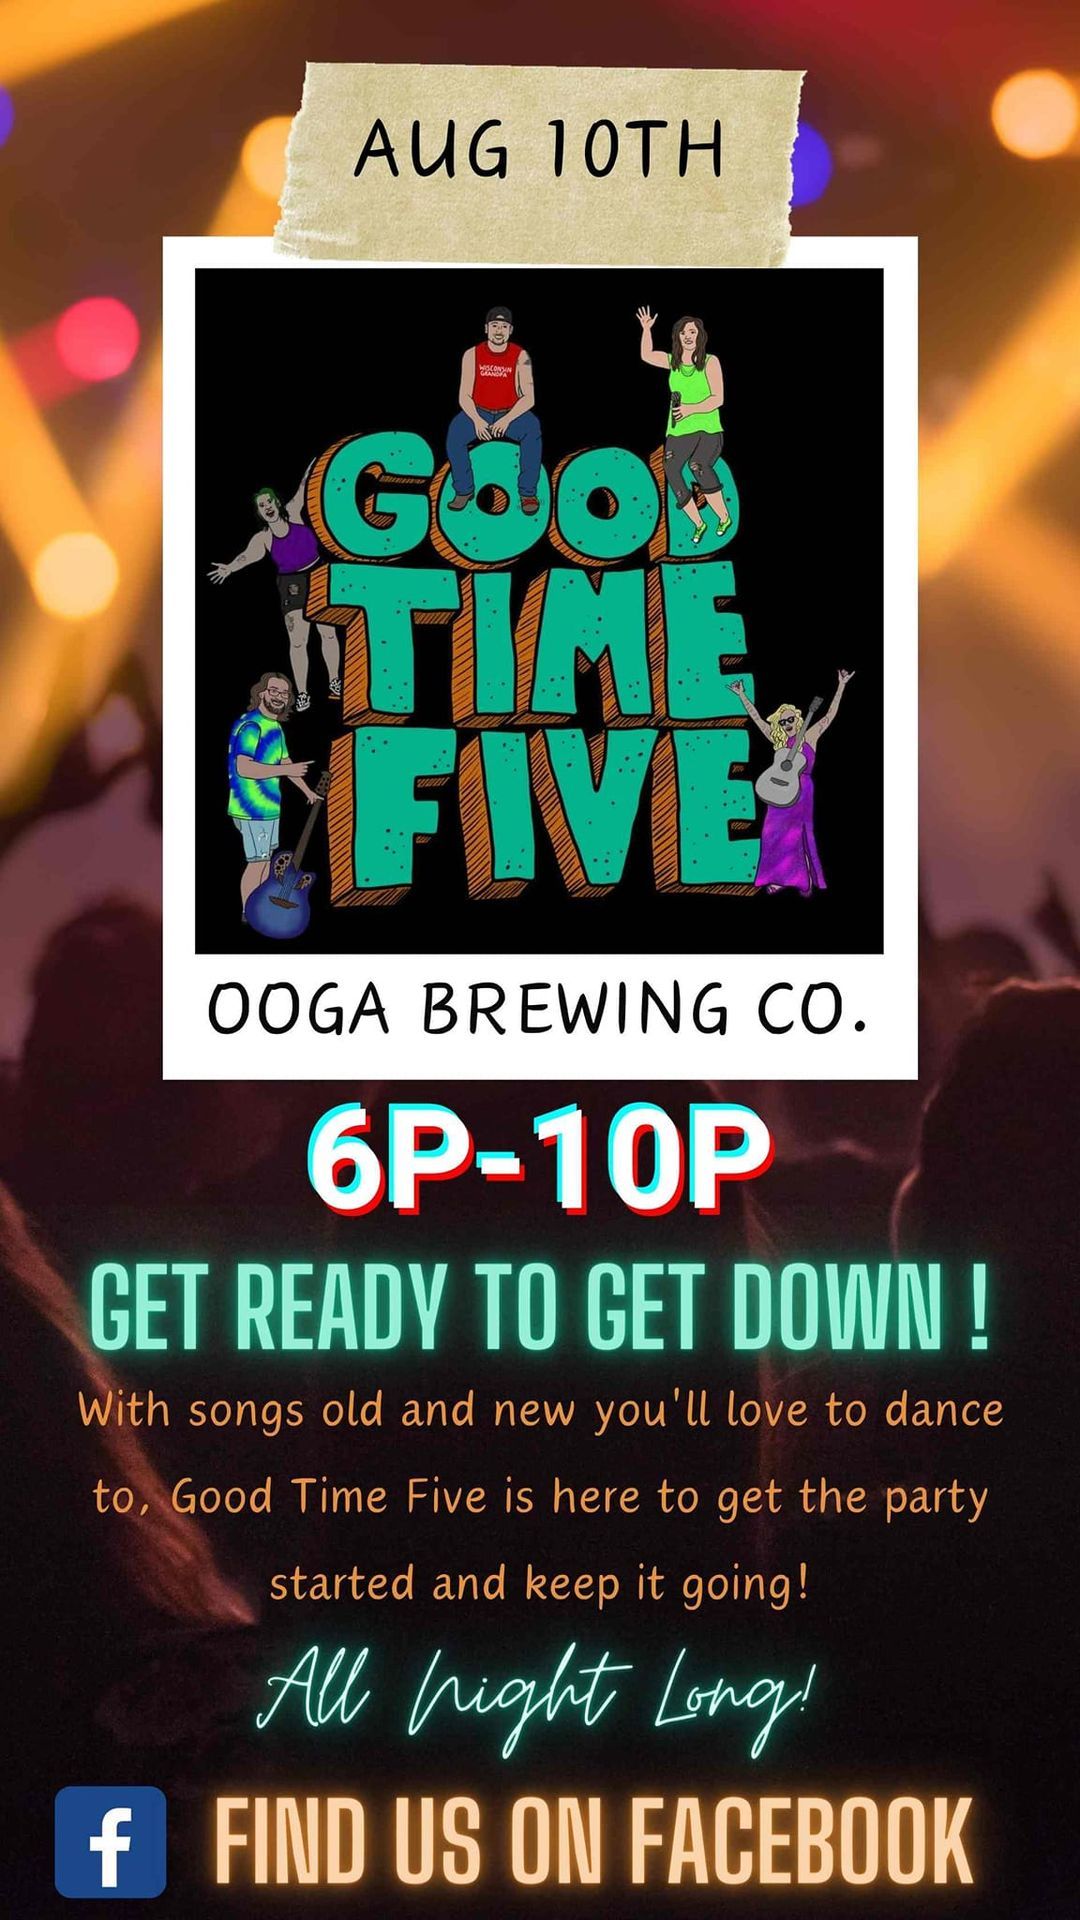 GOOD TIME FIVE @ OOGA BREWING CO